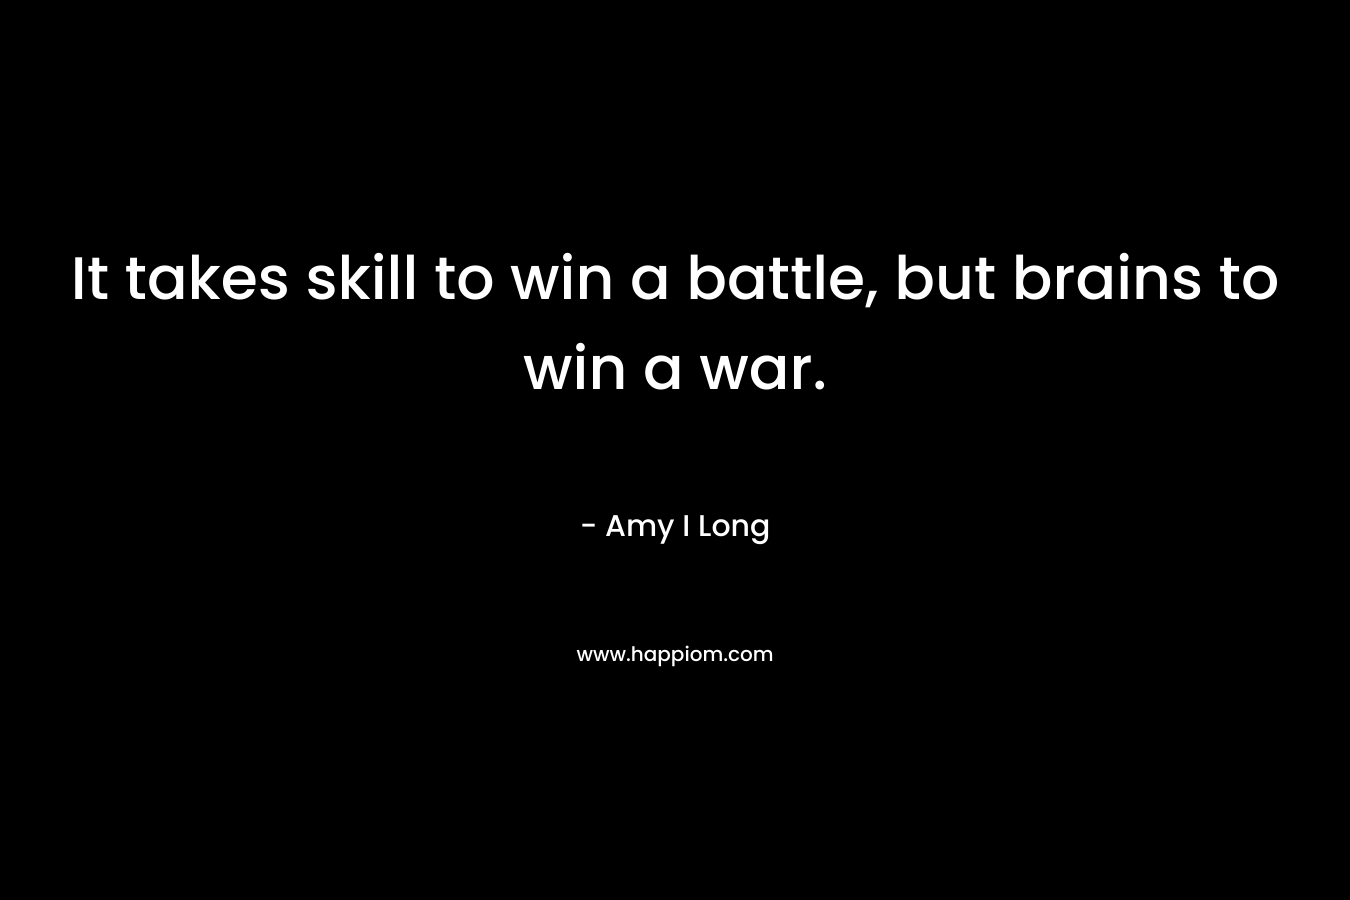 It takes skill to win a battle, but brains to win a war.